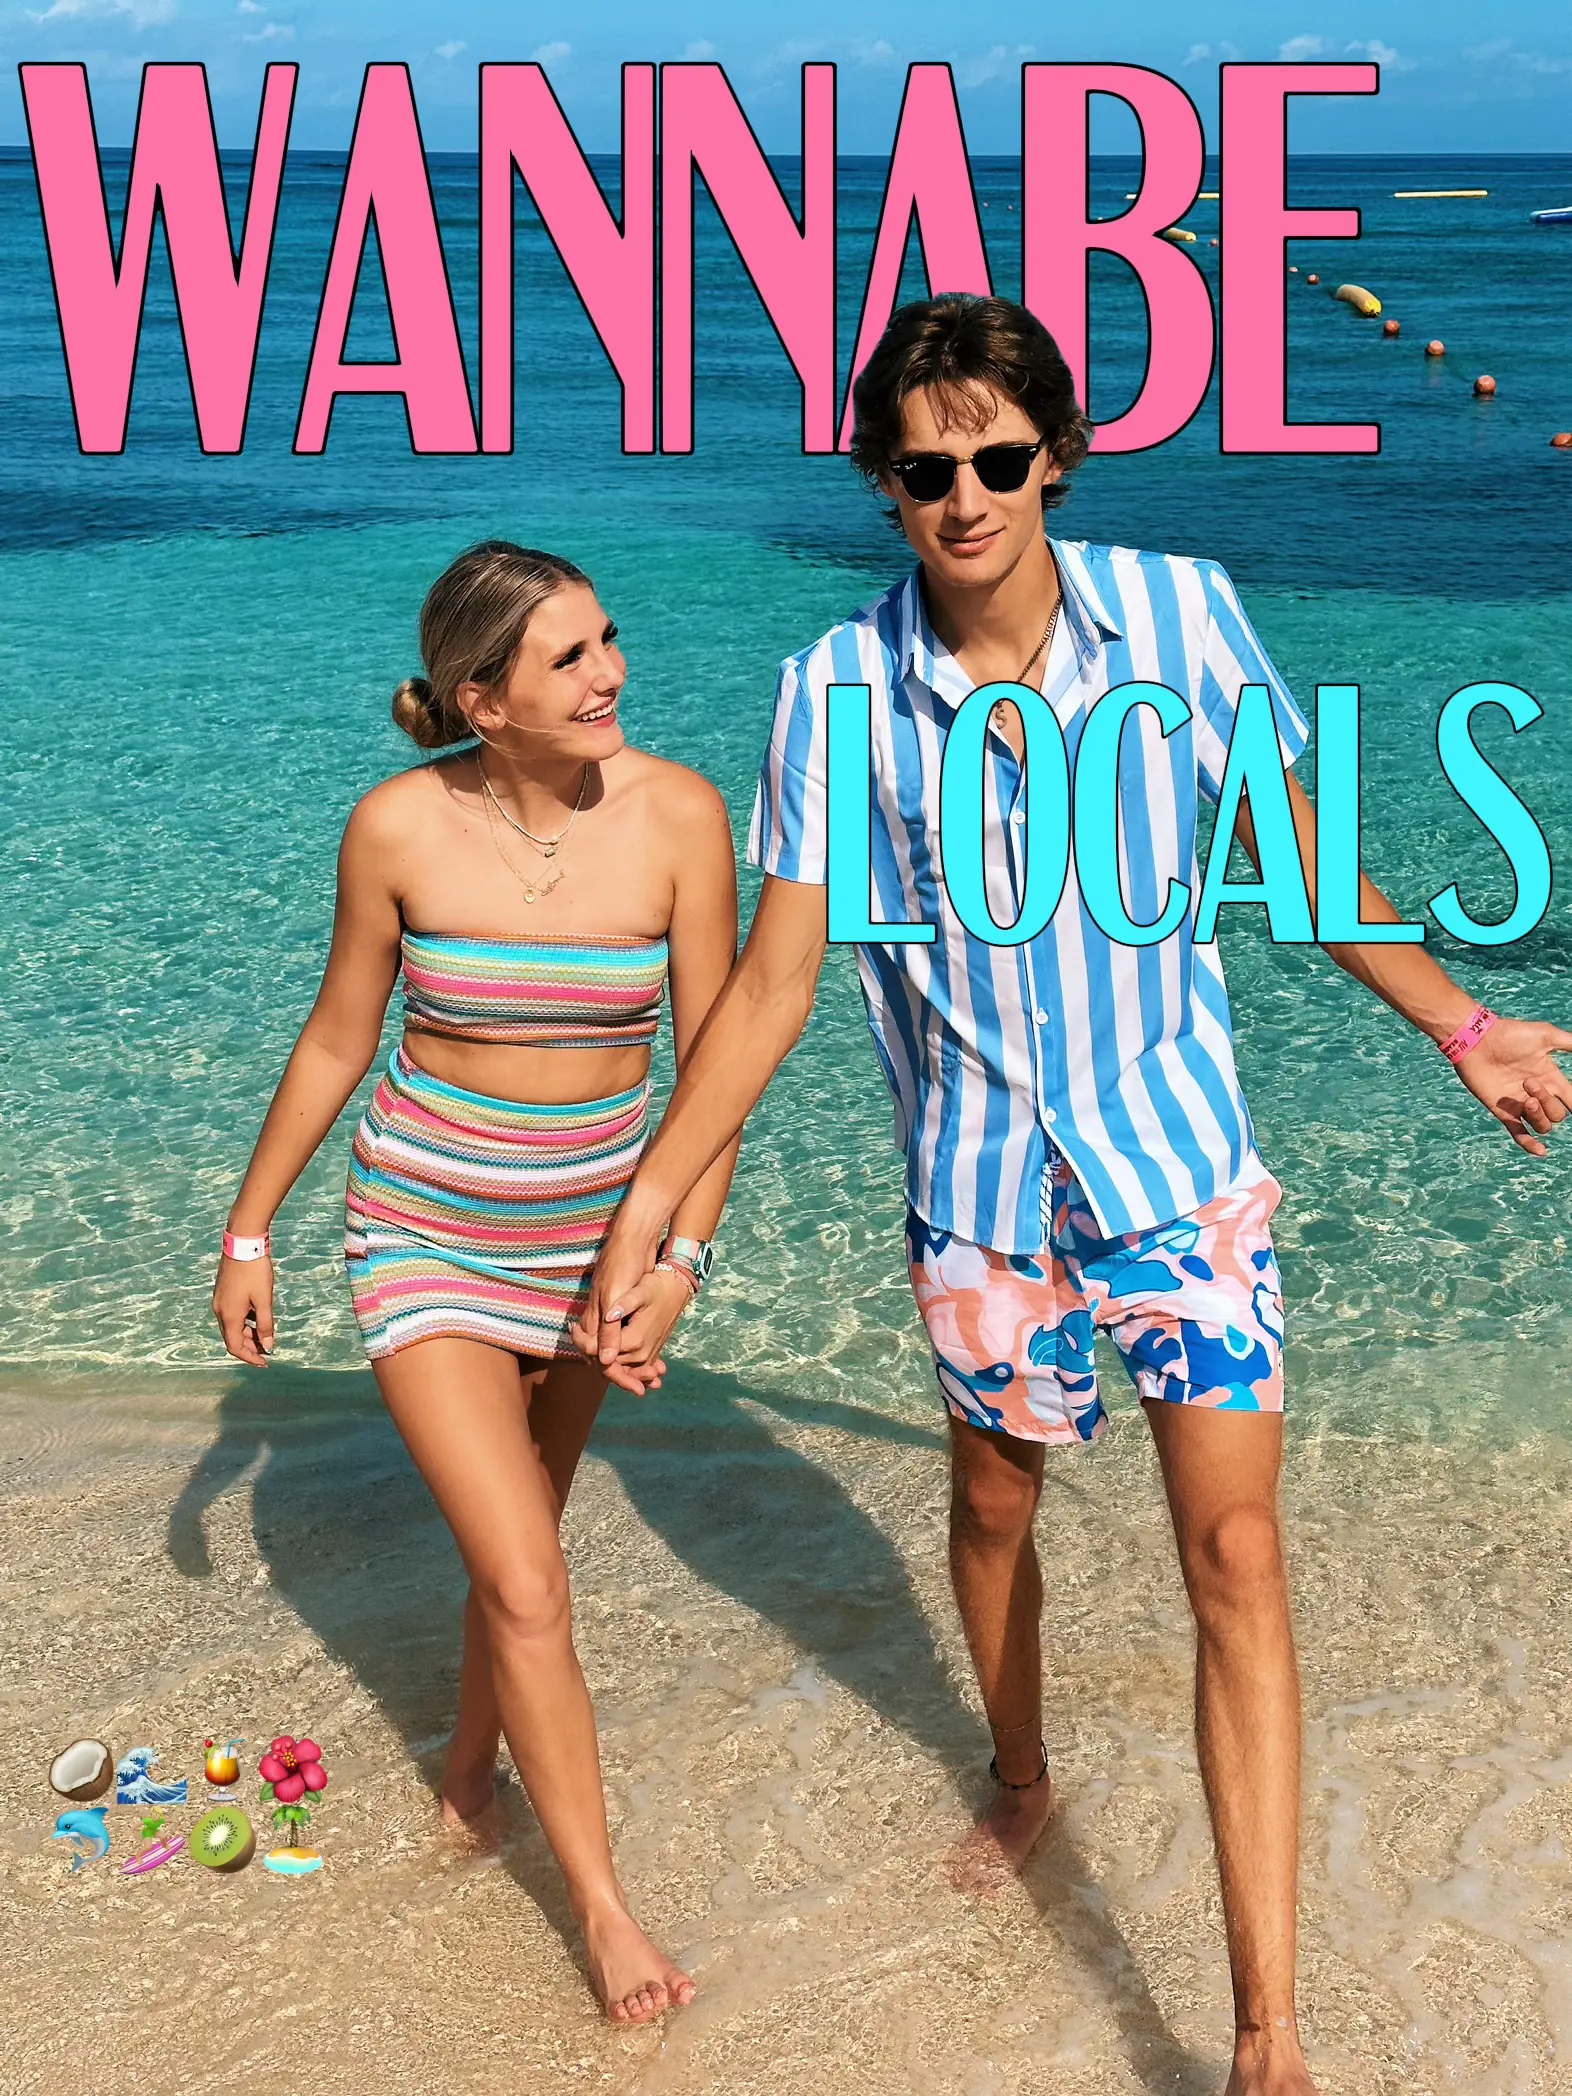  Two people standing on a beach, one wearing a striped shirt and the other wearing a bikini.